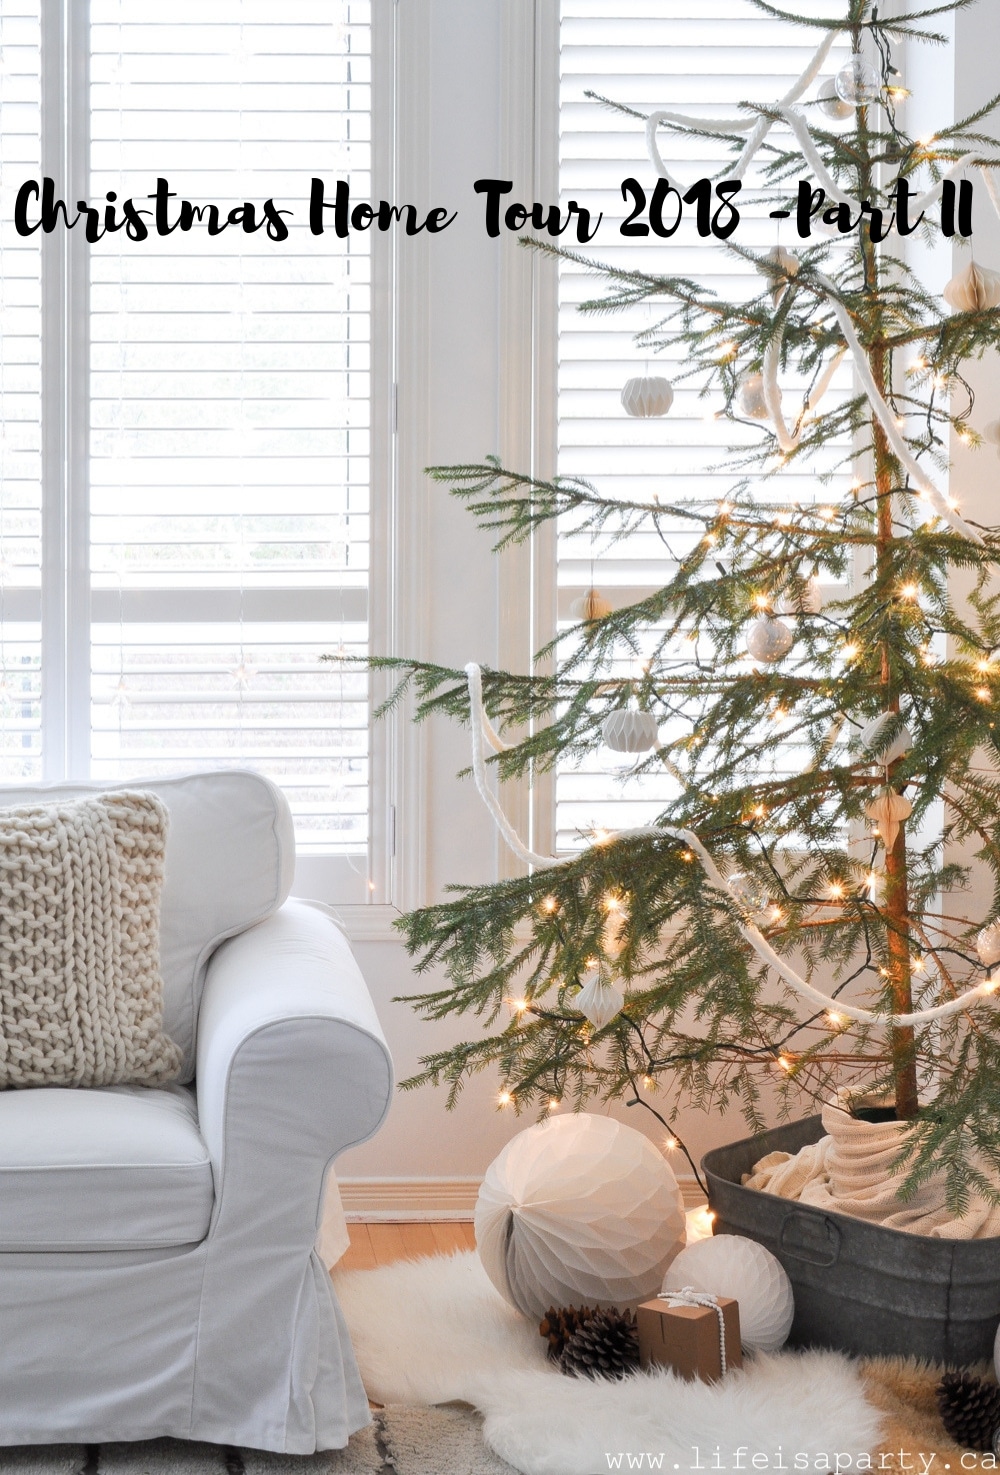 Christmas Home Tour 2018 -Part II: Rustic Scandi design, with lots of white and natural elements and some vintage Xmas pieces too.